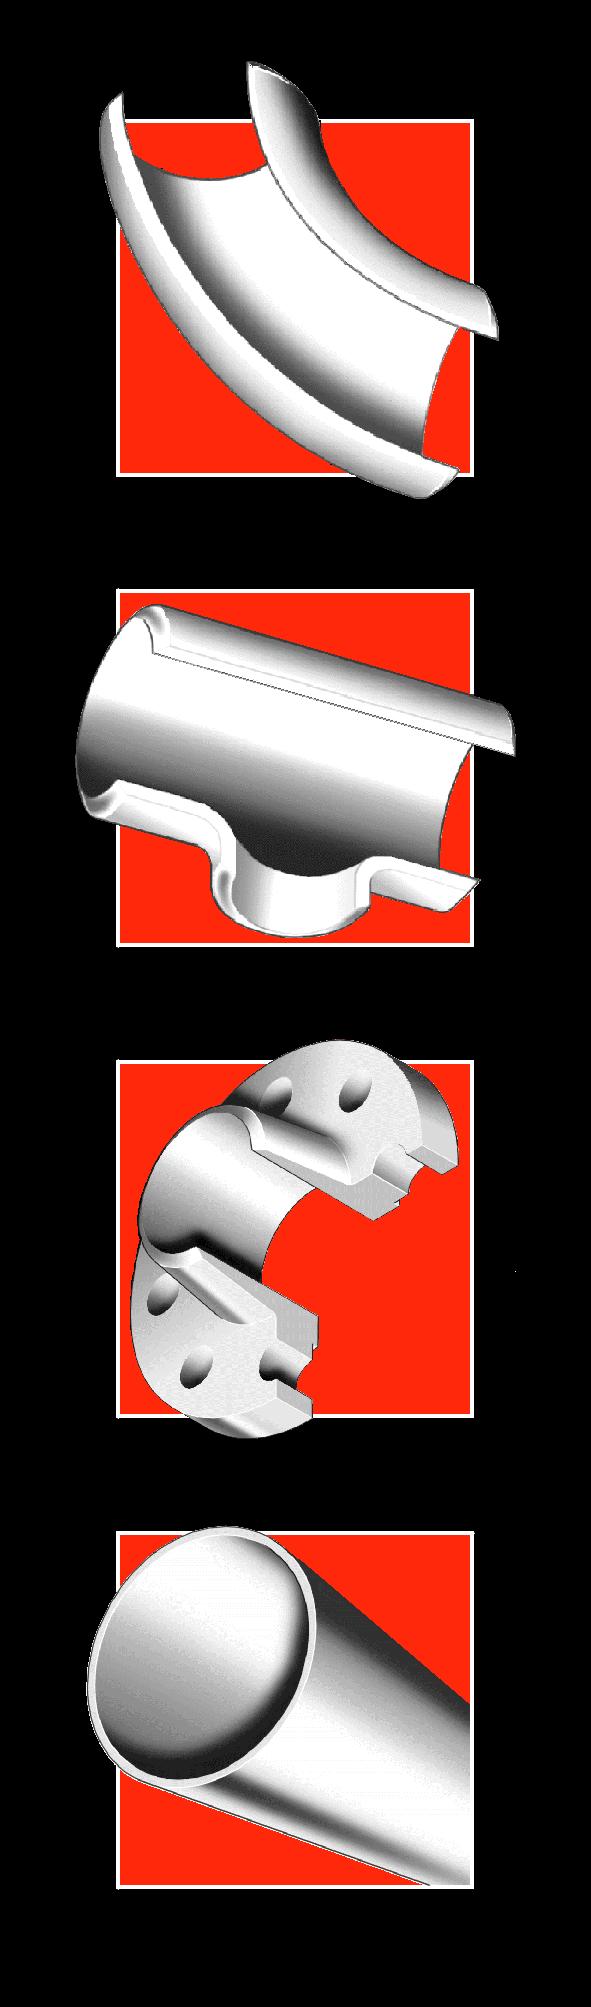 Section 7 Socket Weld and Threaded Fittings This Section contains dimension and tolerance information extracted from American and British specifications applicable to socket weld and threaded